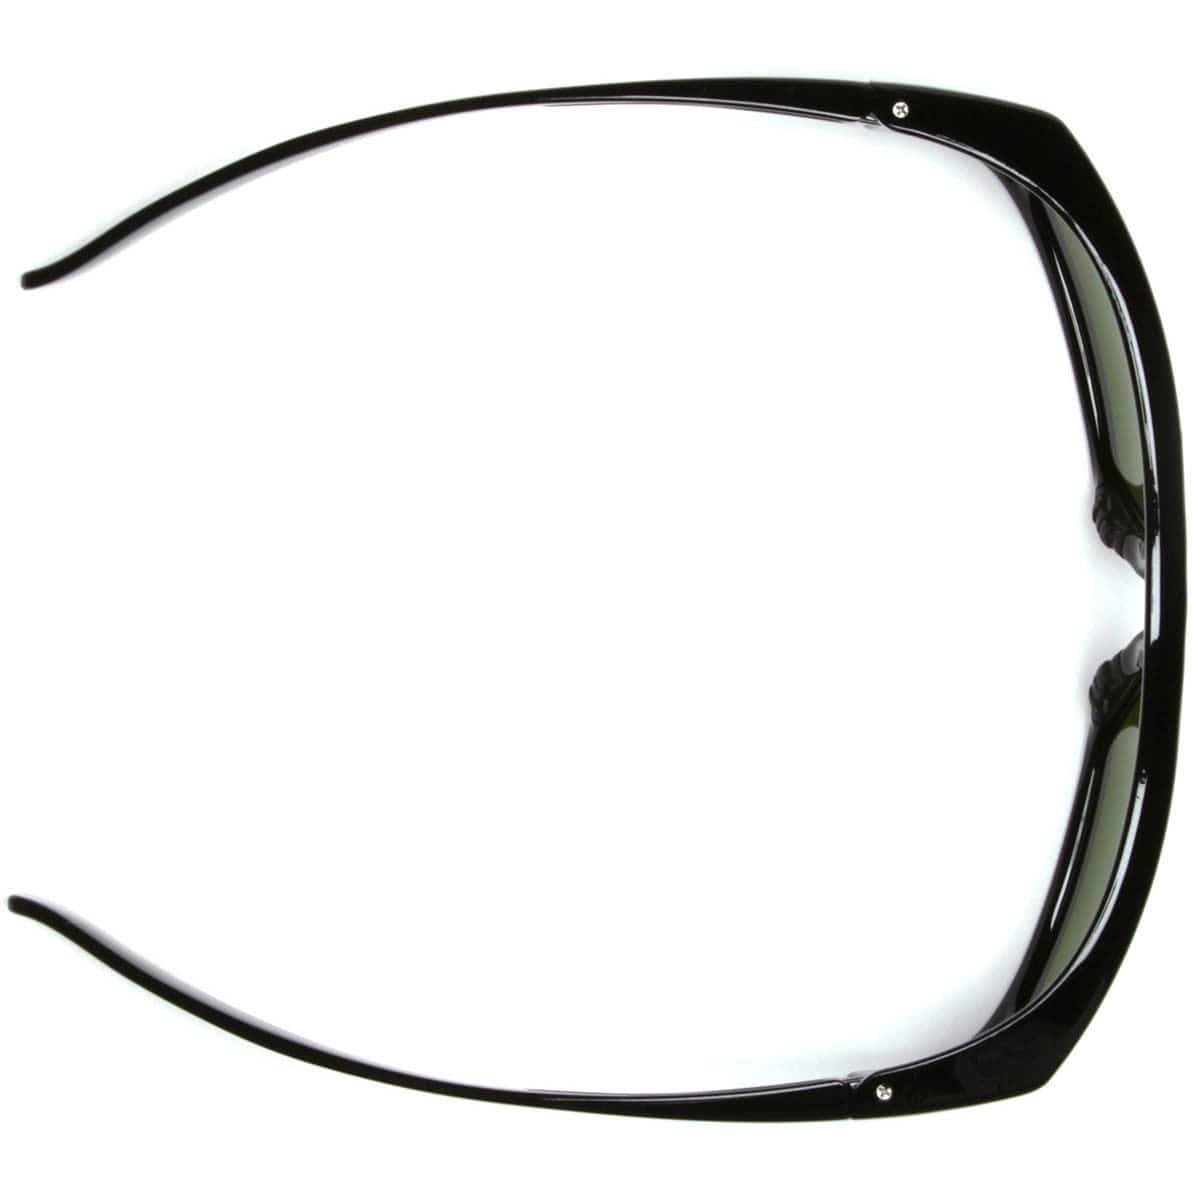 Pyramex SB7910DRX Emerge Safety Glasses Top View